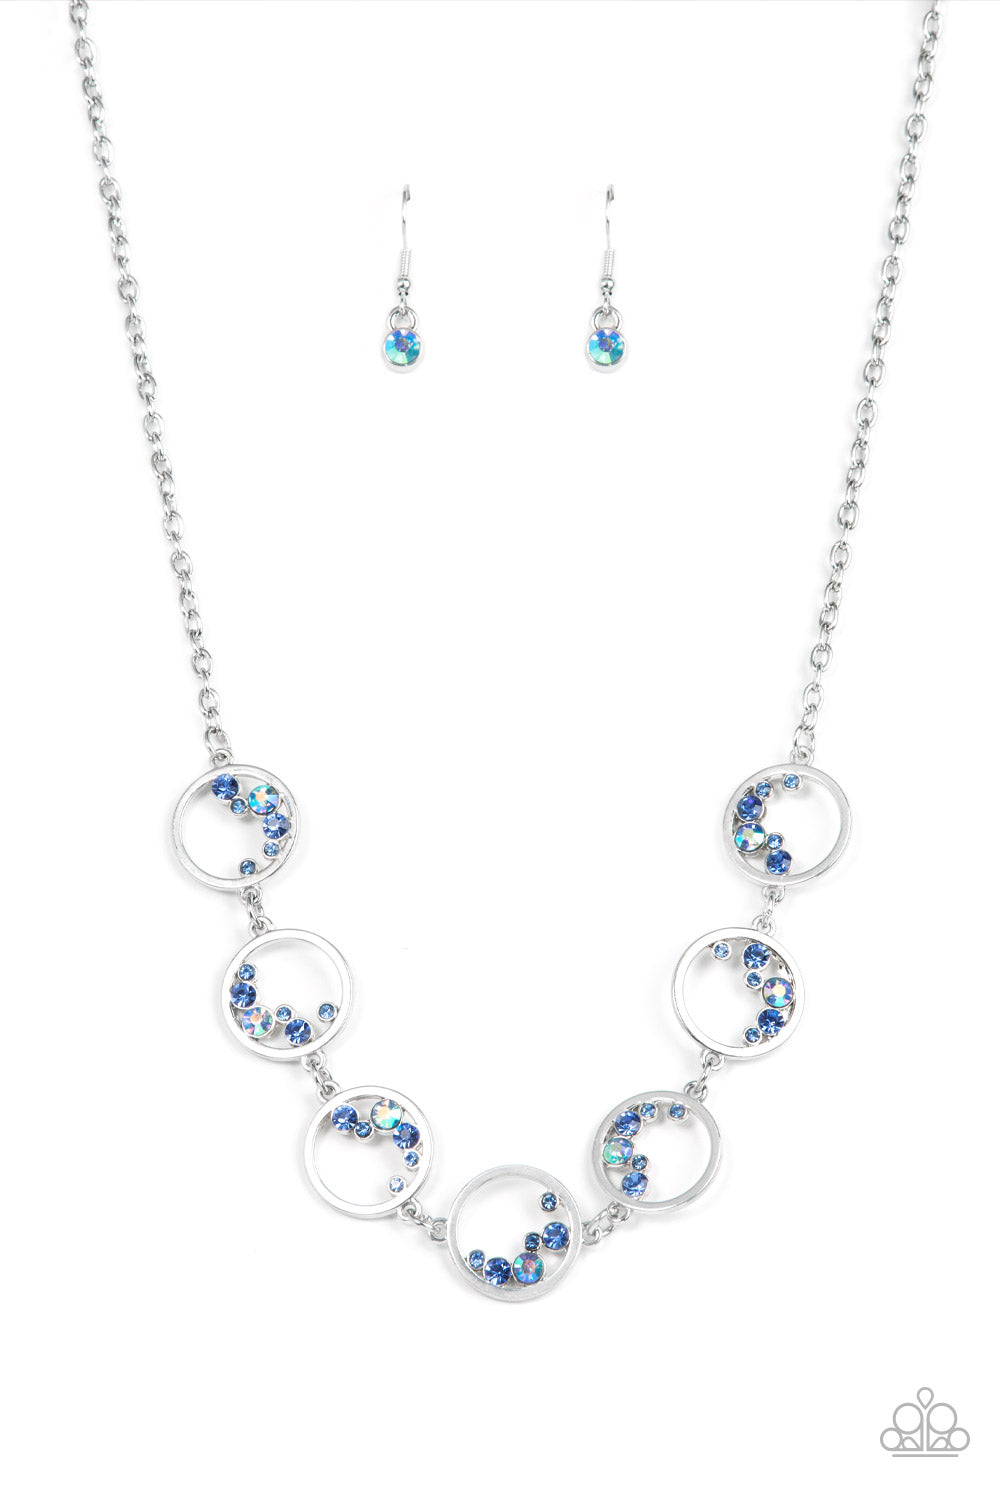 Blissfully Bubbly Necklace (Blue, White, Pink)